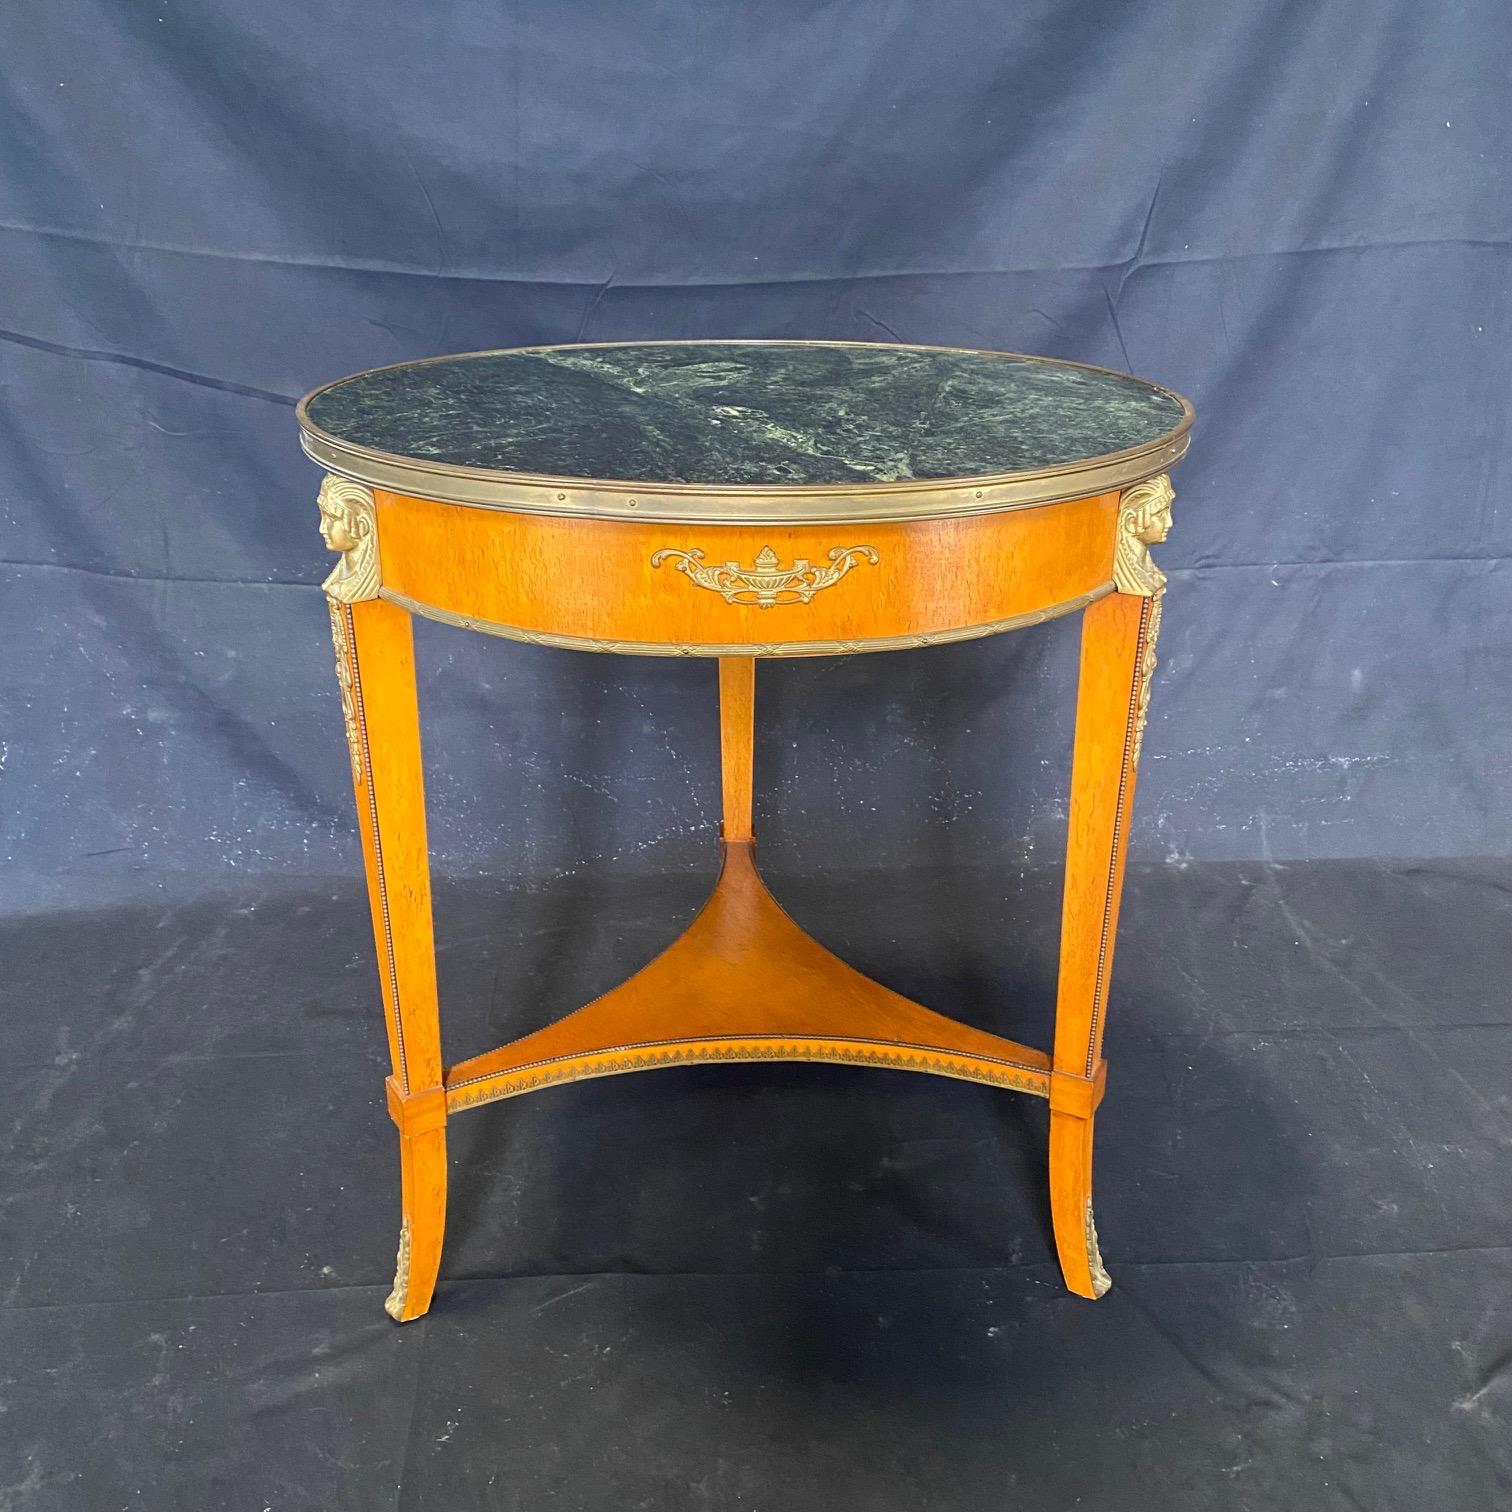 Elegant French Neoclassical Style Green Marble Top Bouilette or Side Table  For Sale 4